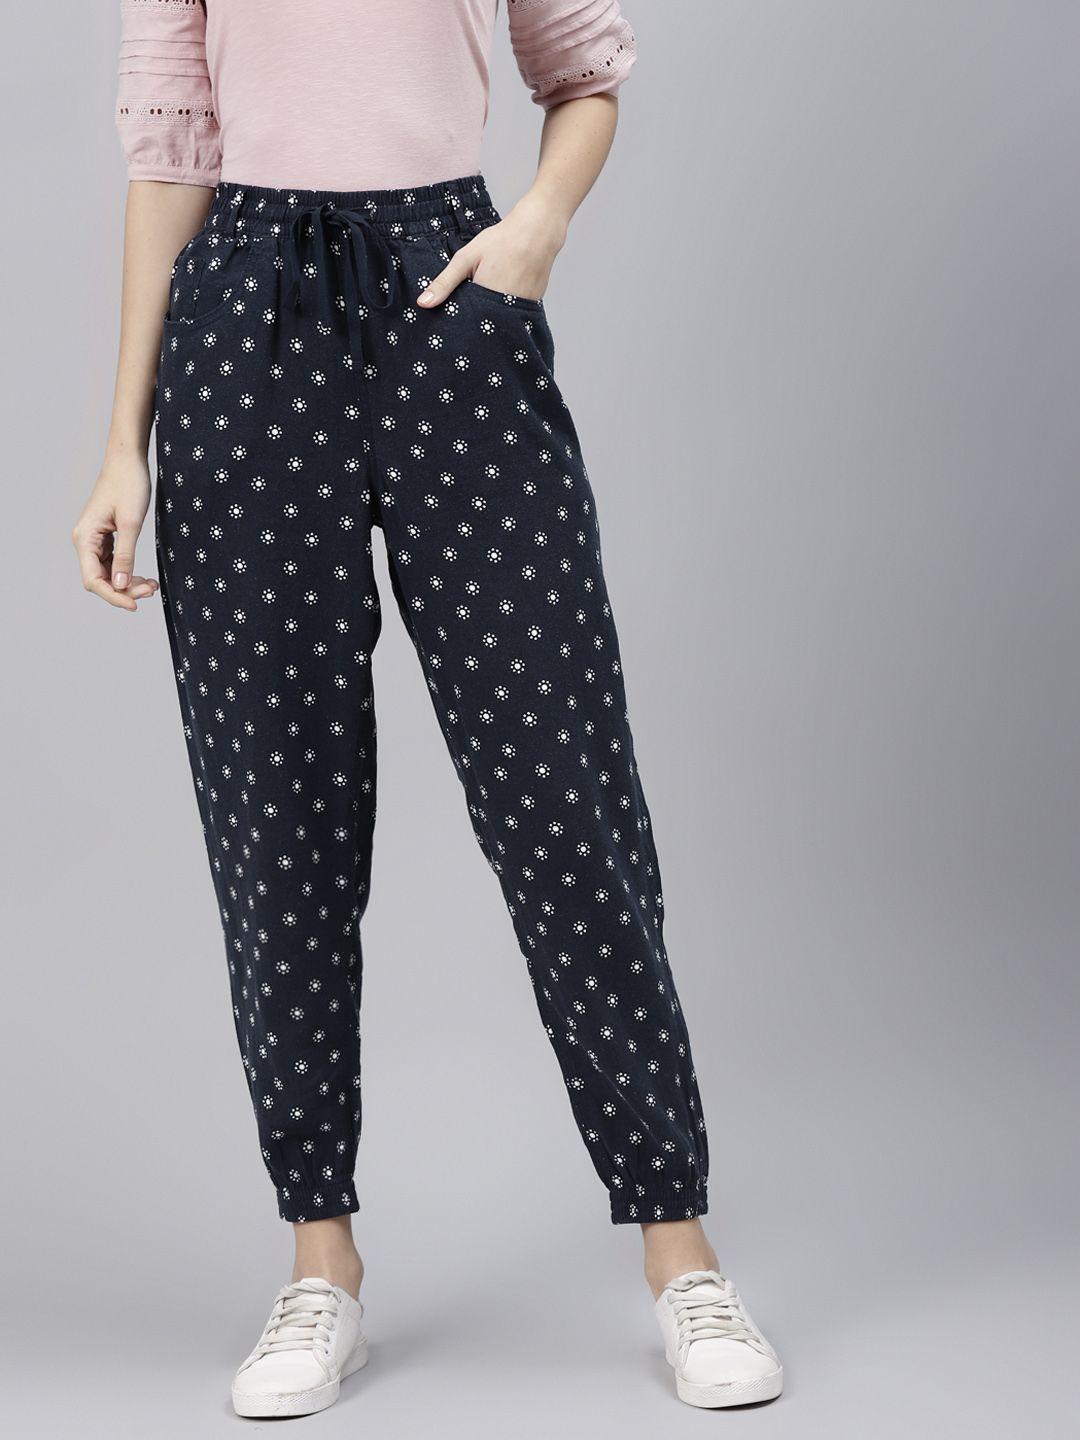 marks-&-spencer-women-navy-blue-floral-printed-linen-joggers-trousers